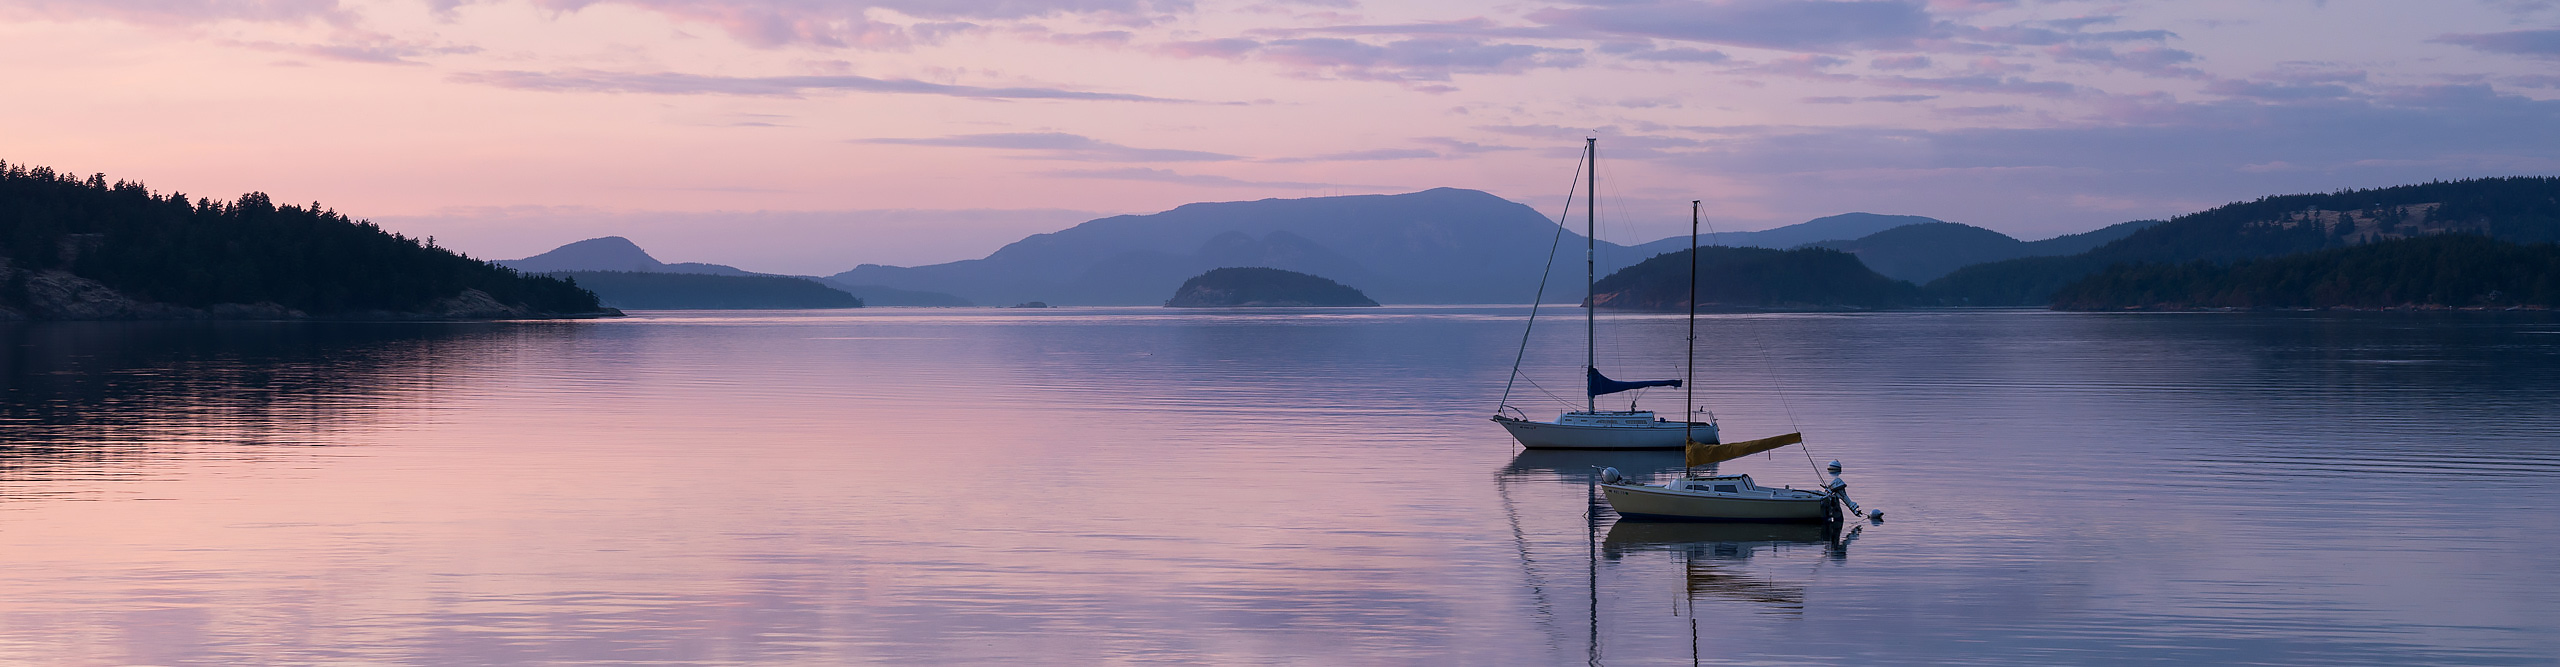 San Juan islands at dusk, with a purple sky and Orcas island in the distance, USA